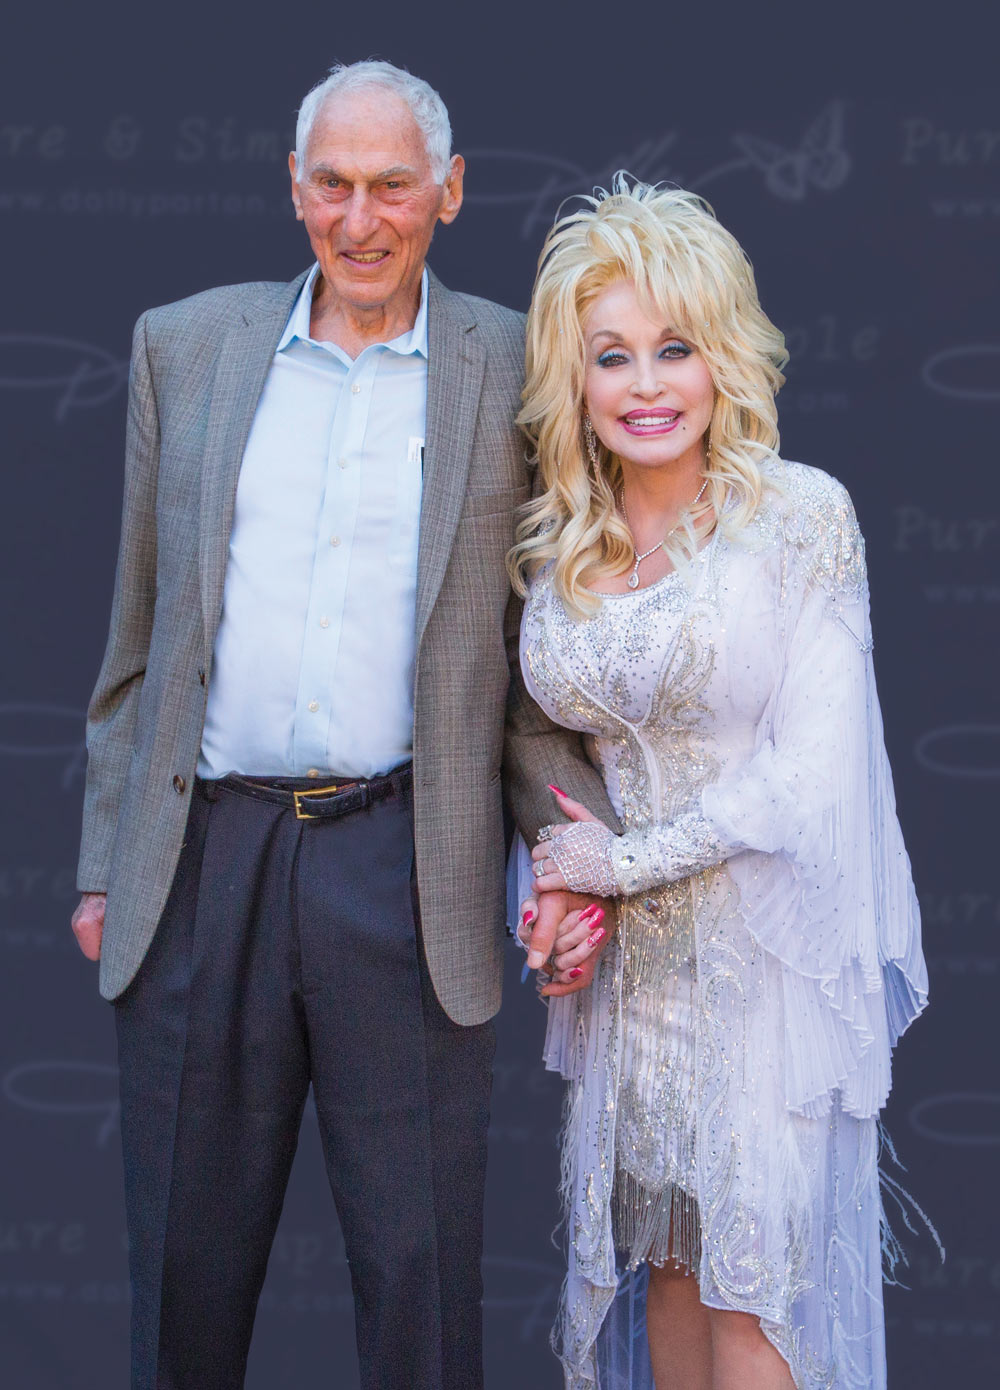 Harold Grinspoon and Dolly Parton